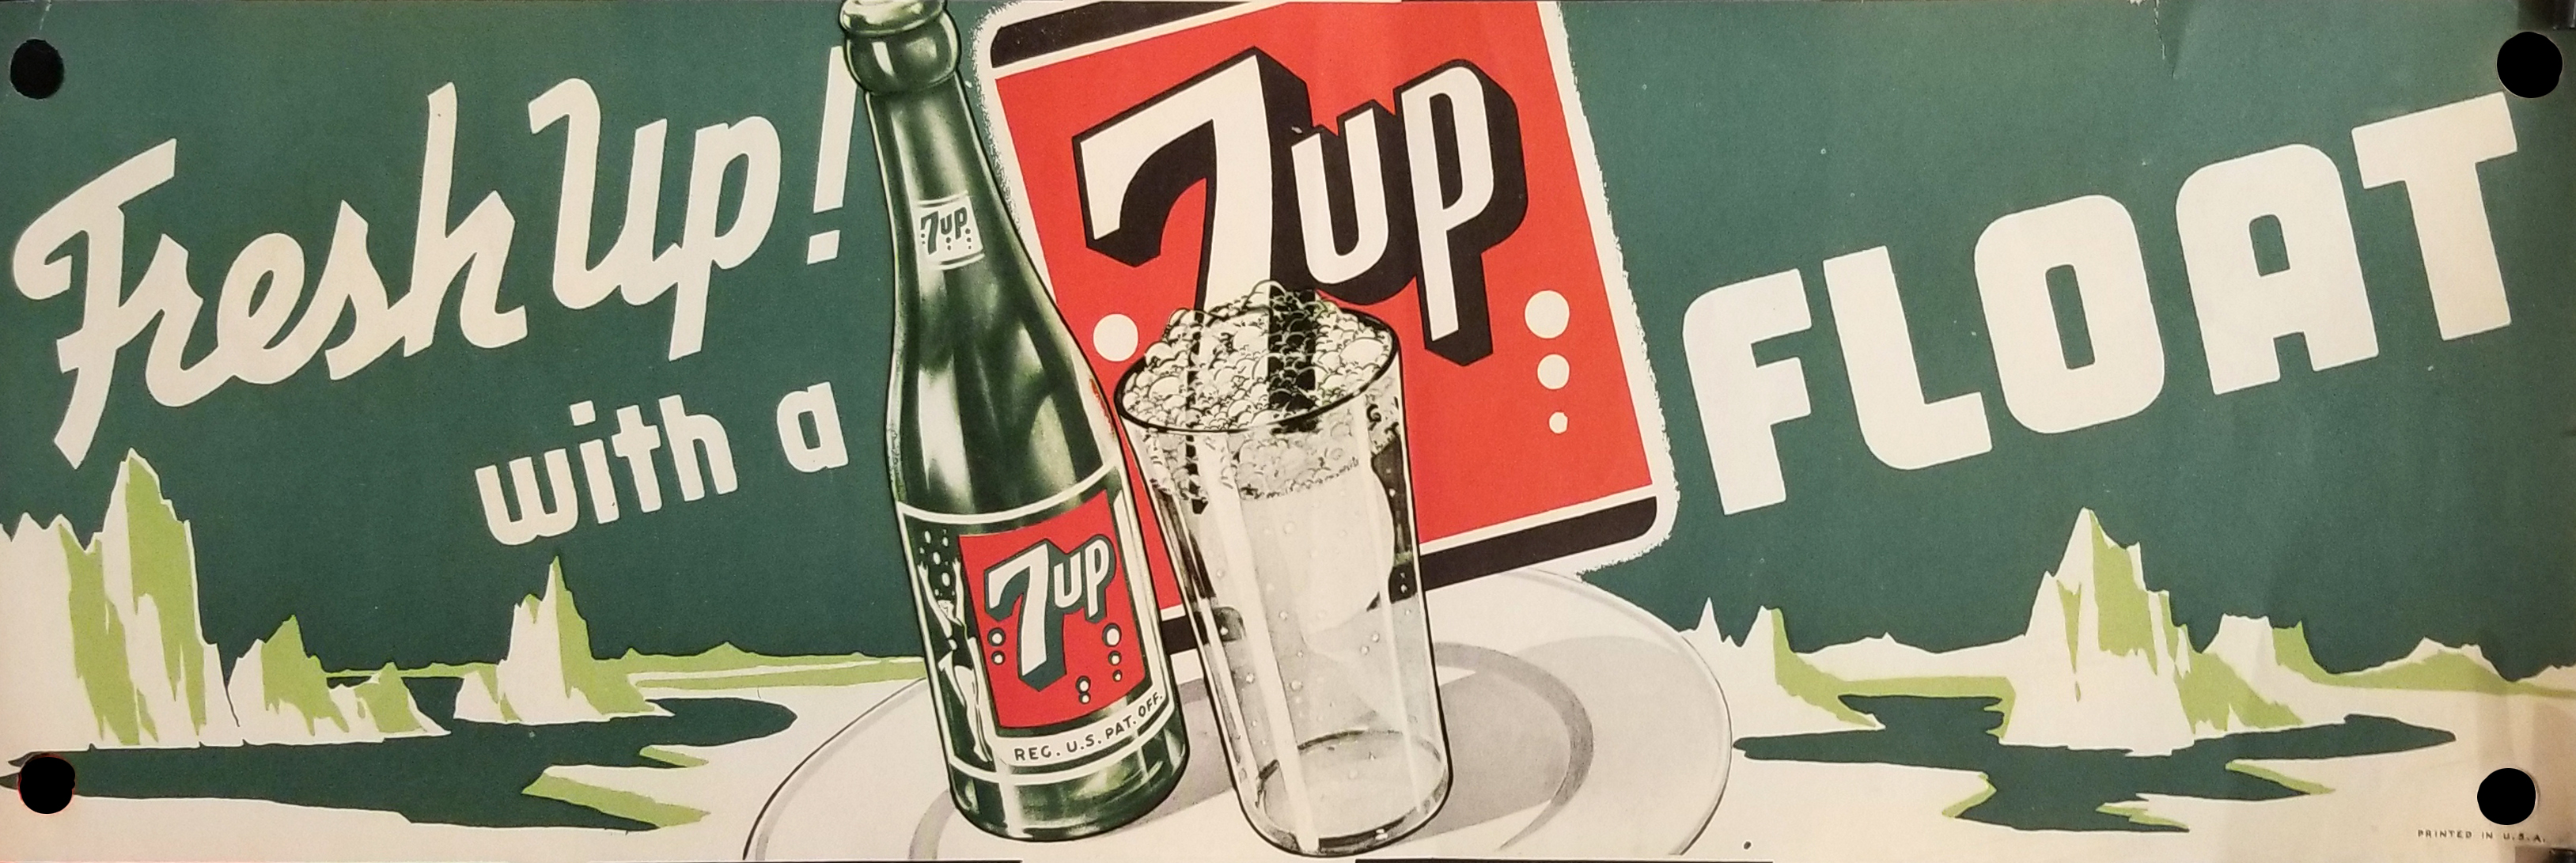 Fresh up! with a 7up Float